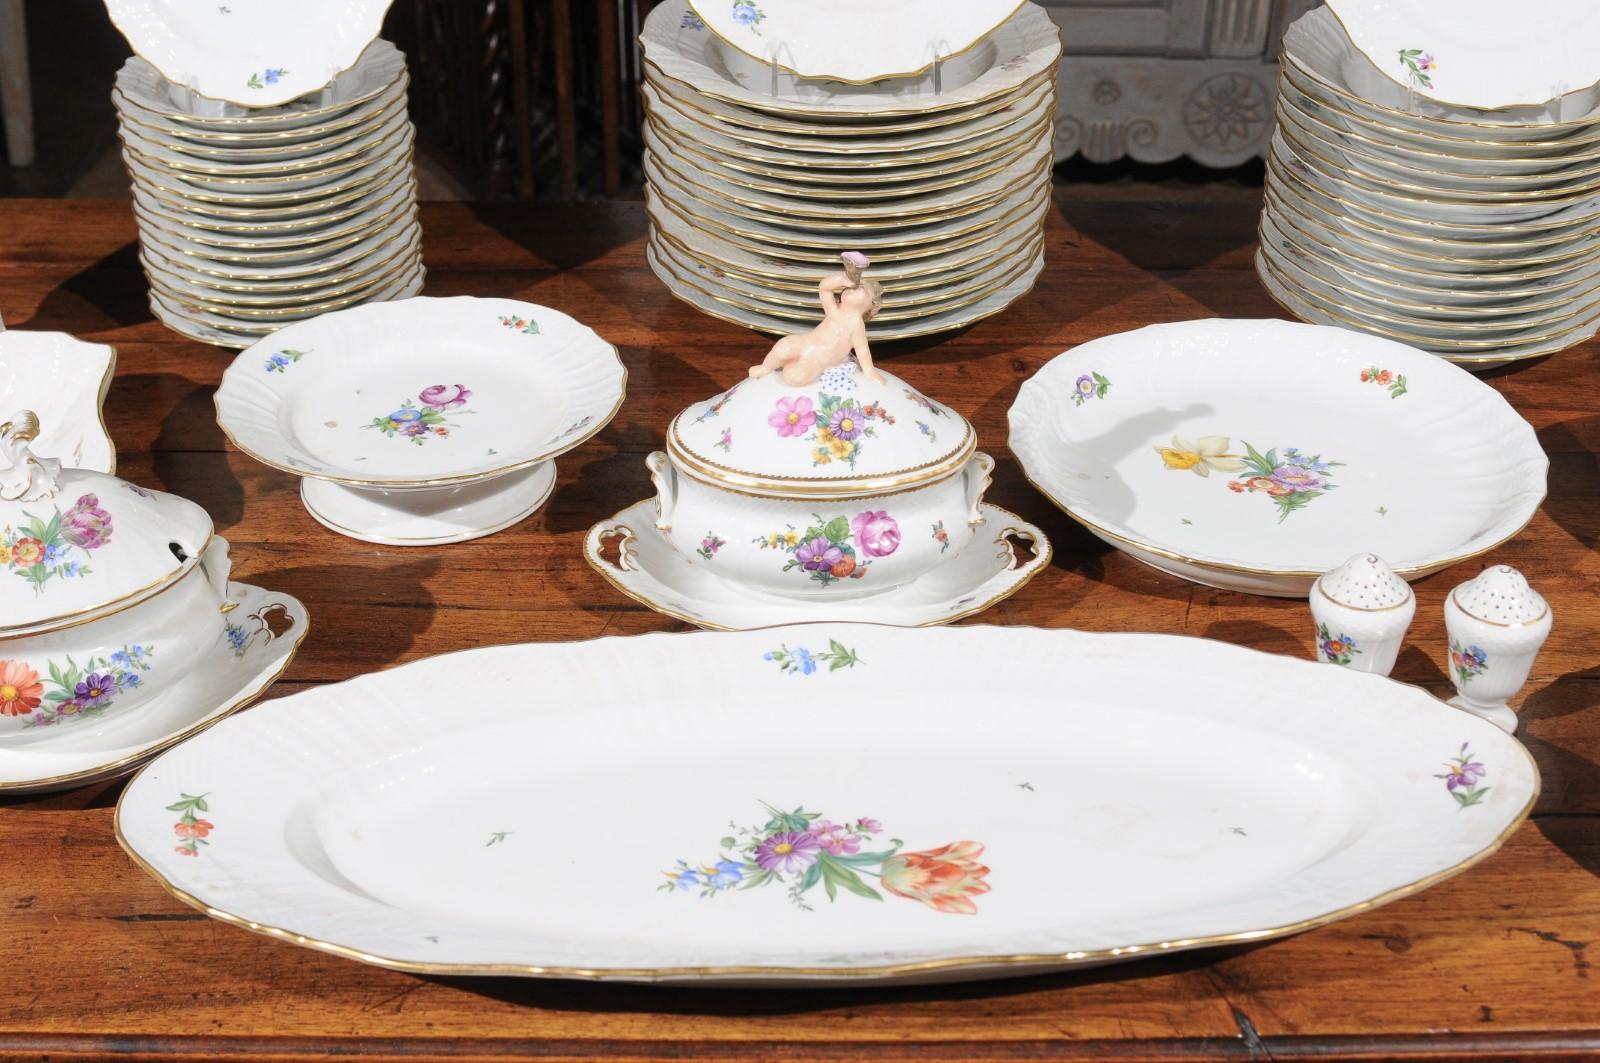 Stamped Royal Copenhagen China Set with Hand Painted Floral Décor and Gilt Trim 1